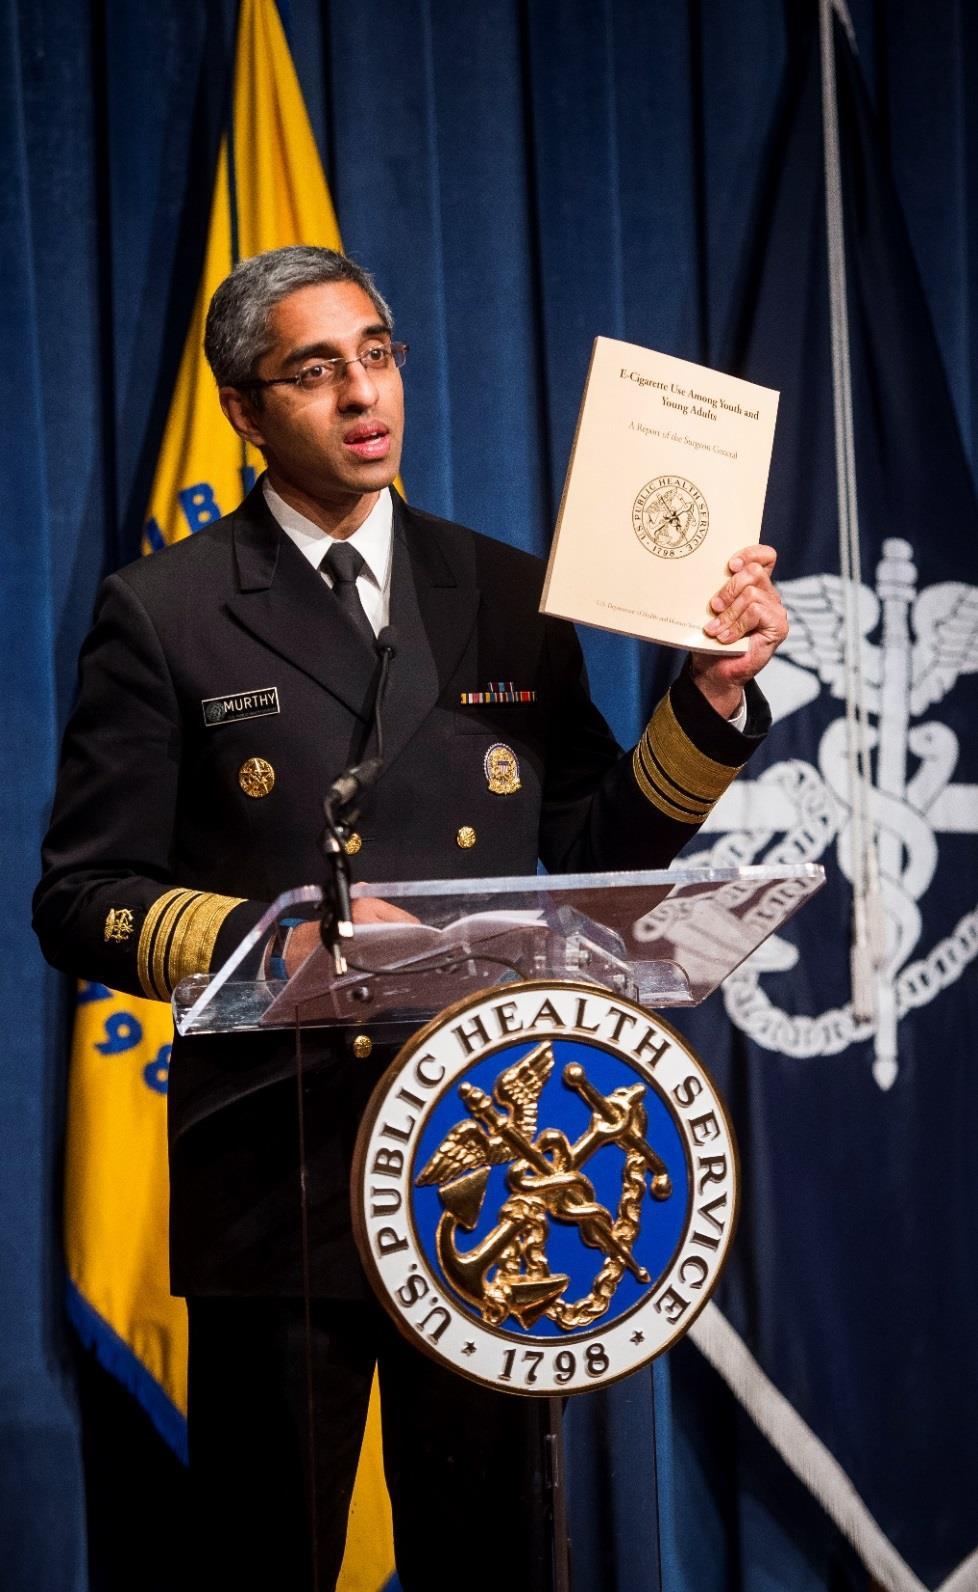 Surgeon General Report E-cigarette Use Among Youth